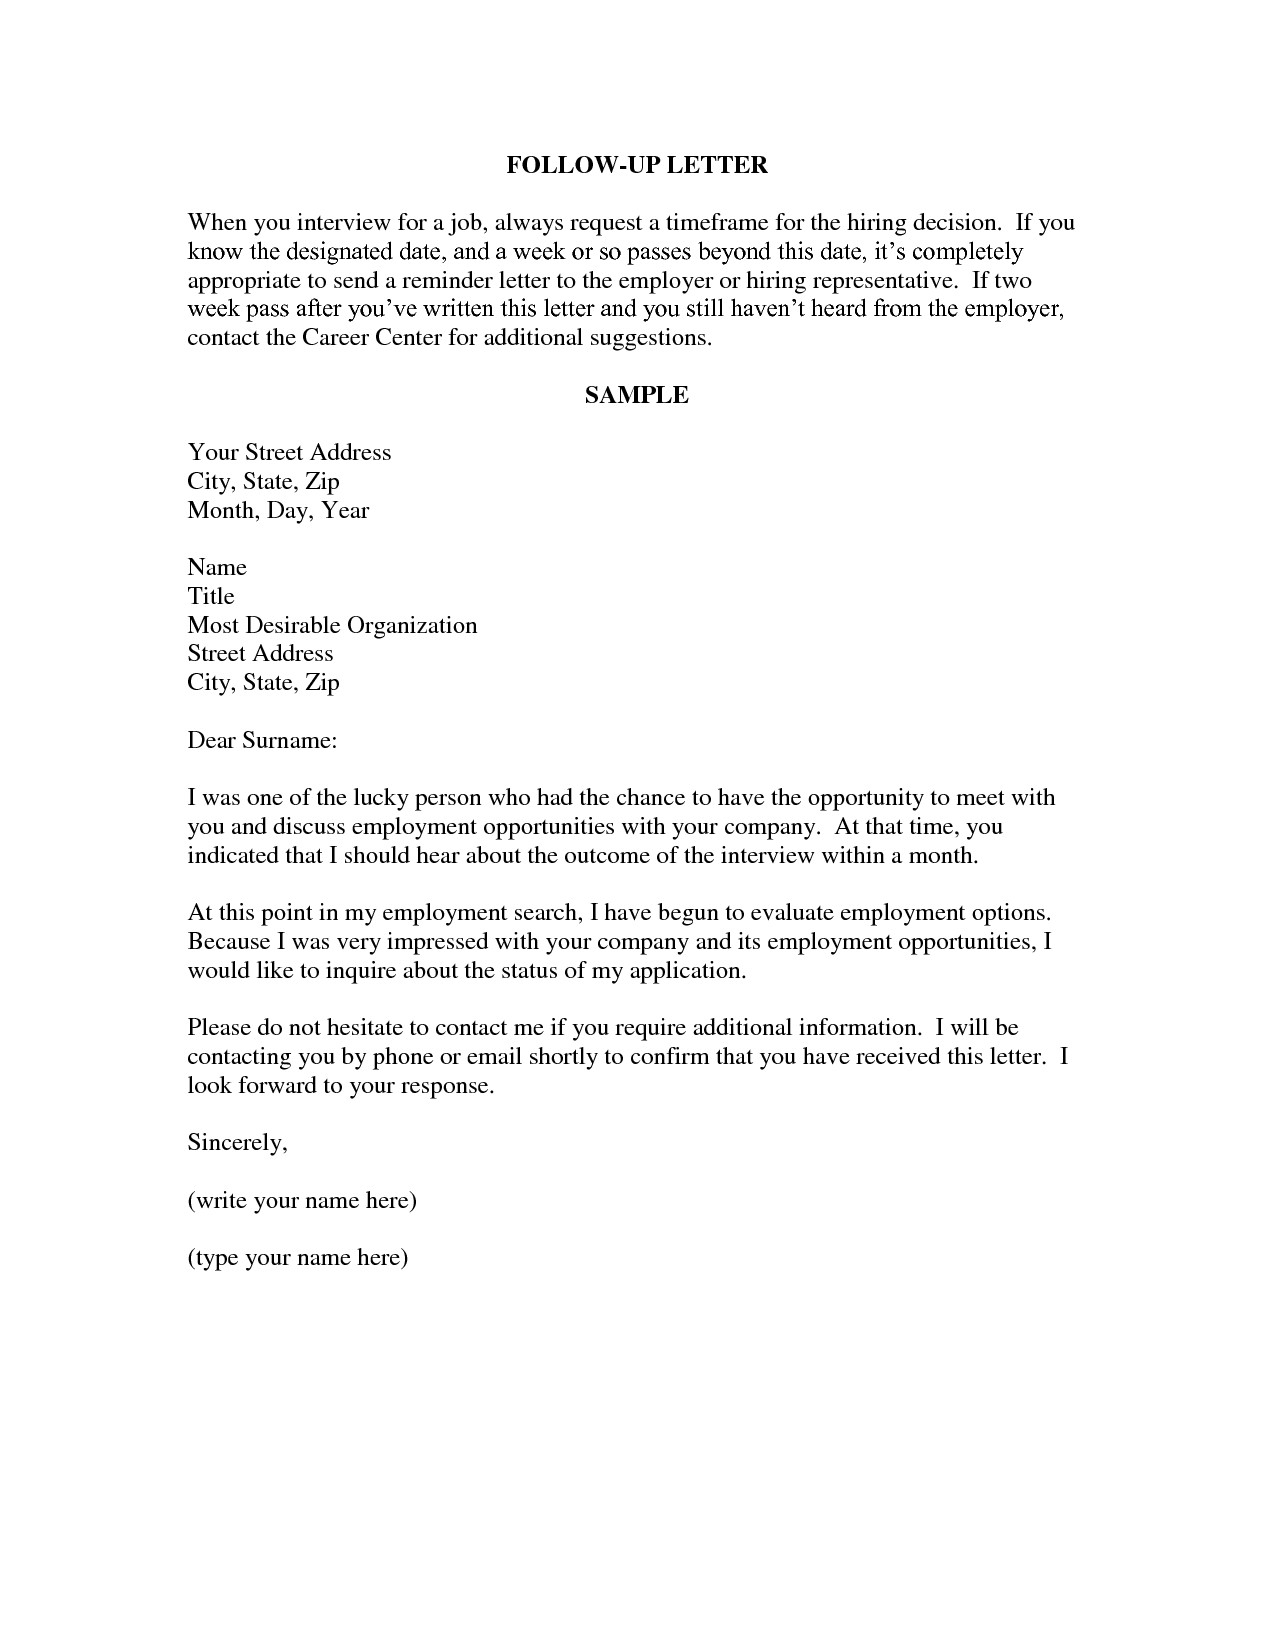 Interview Thank You Letter Template - Interview Templates for Employers